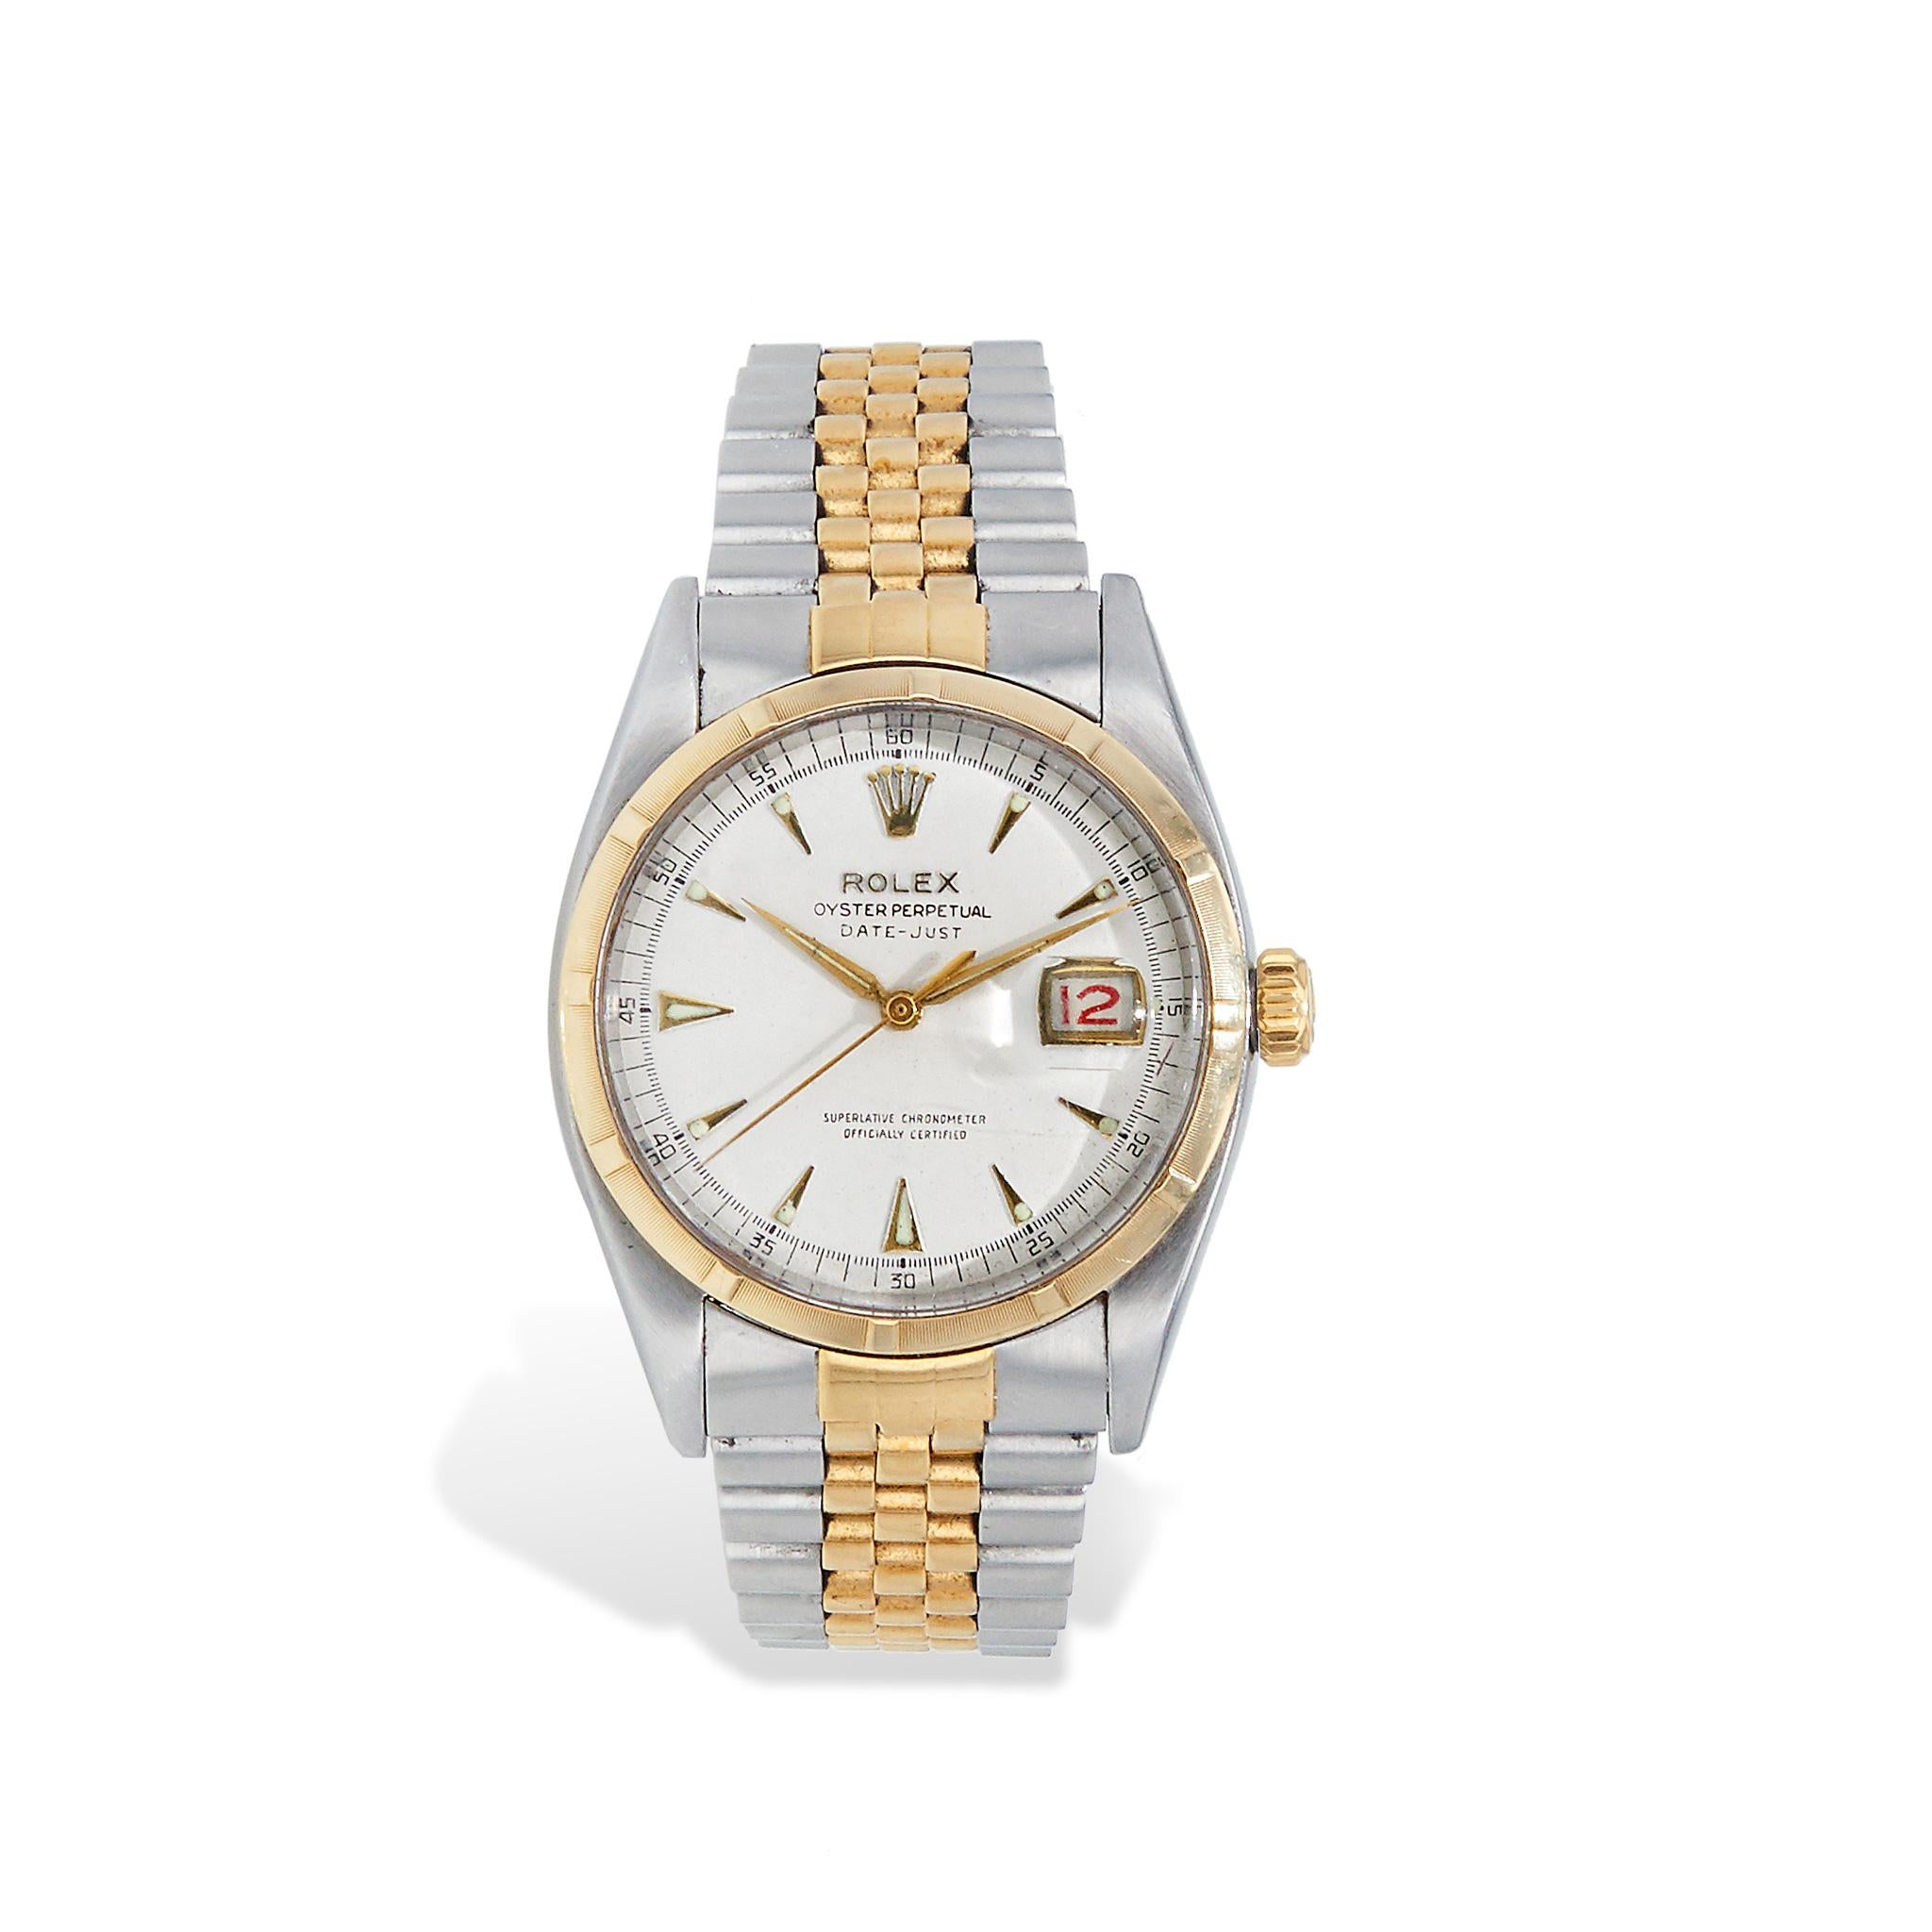 Rolex Datejust Two-tone 36mm Estate Watch - 6305 In Excellent Condition For Sale In Miami, FL